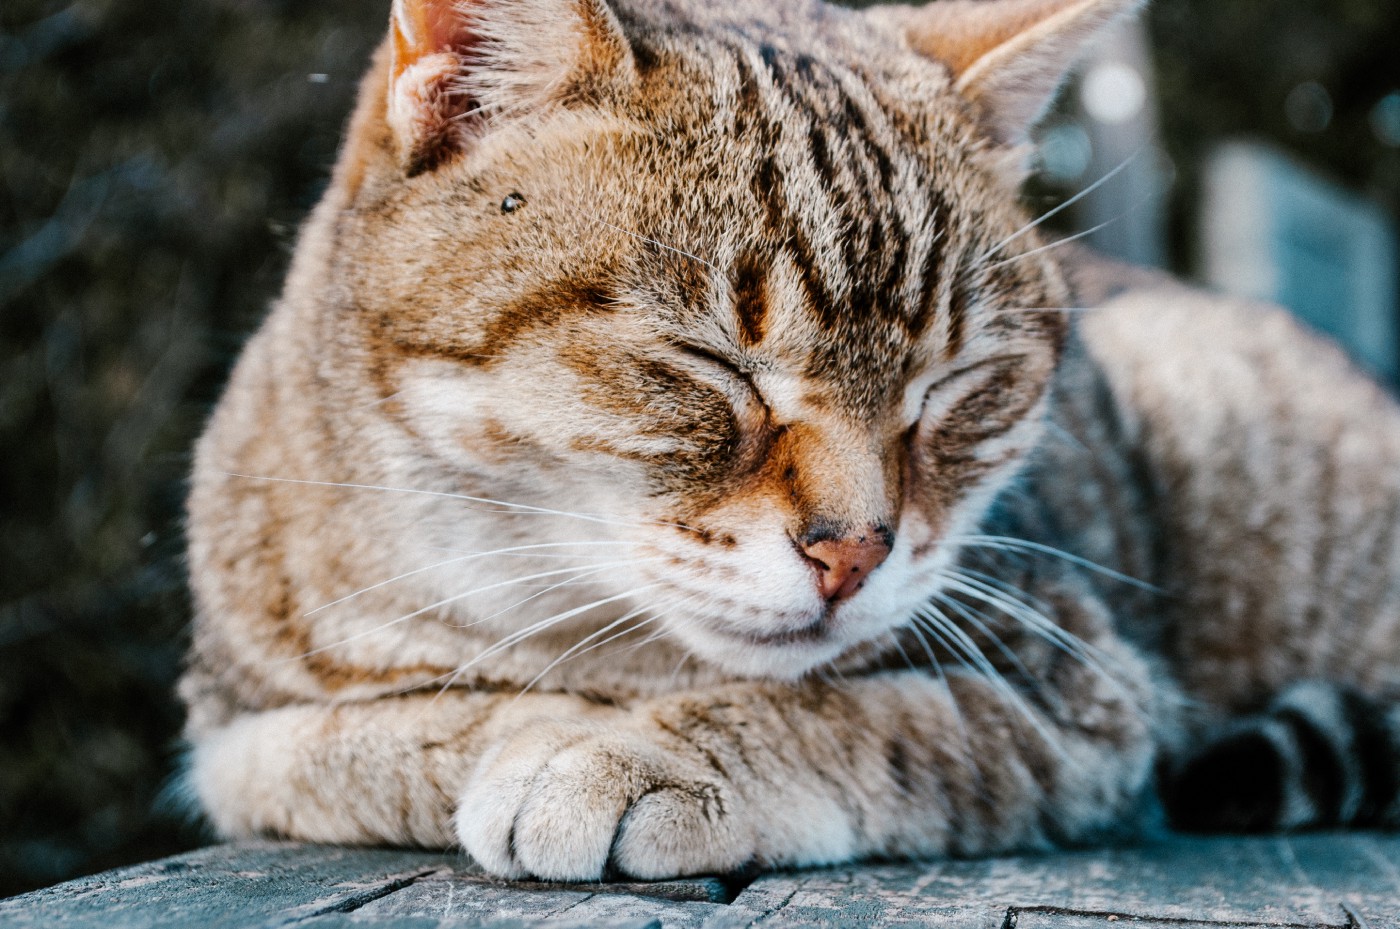 A relaxed cat with its eyes closed